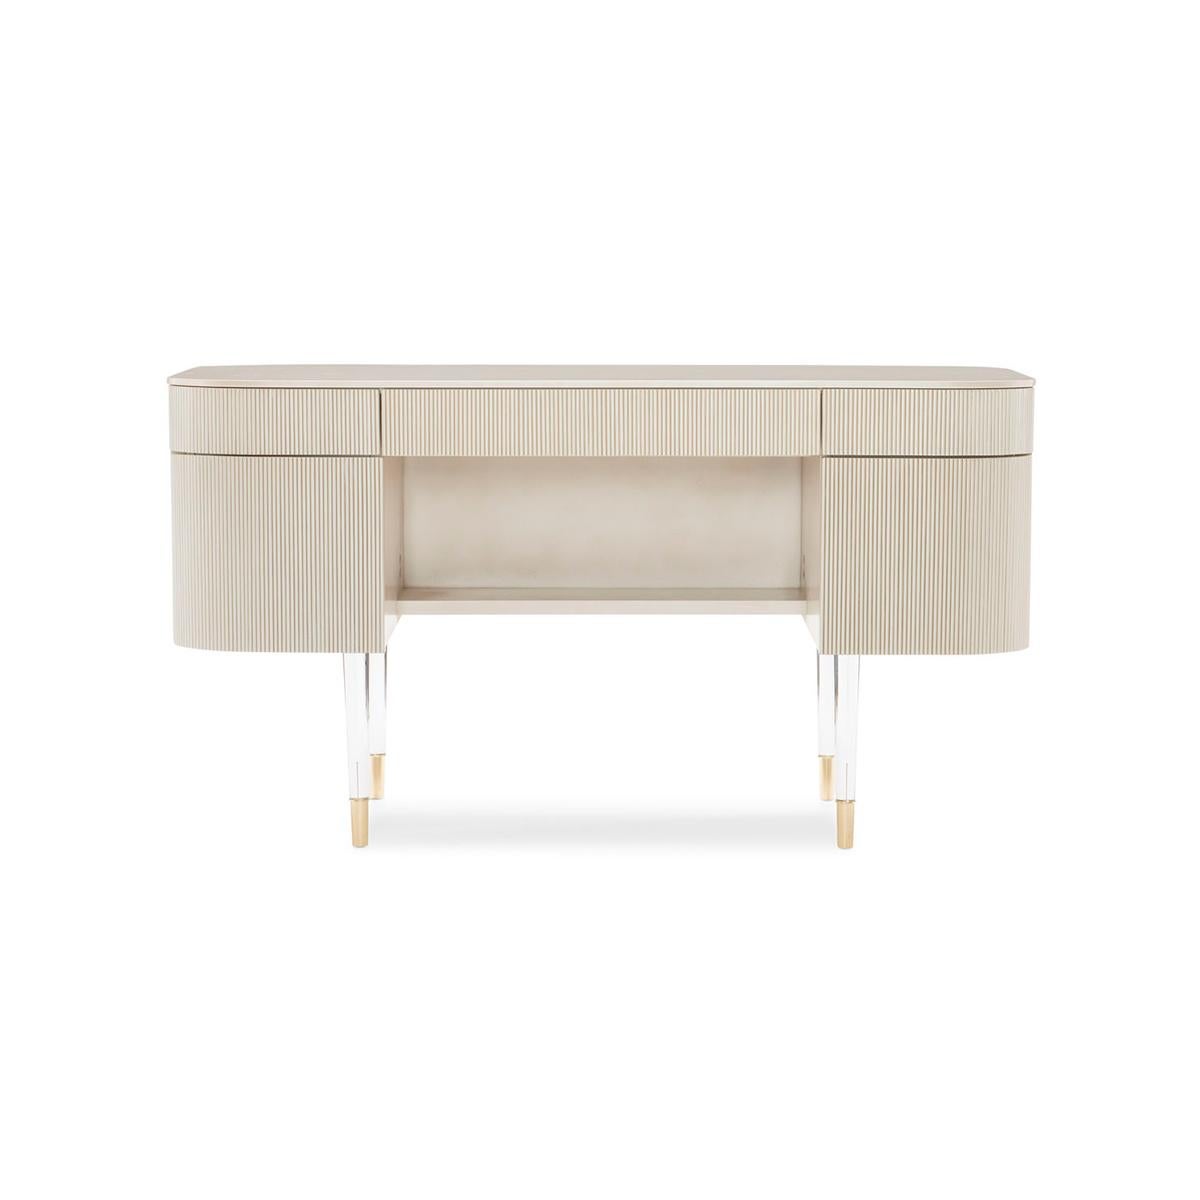 Glamorous storage comes to life in this elegant creation. With a touch of femininity, its graceful design creates a place for everything and somewhere to keep everything in its place. Use it as a desk or dressing table—or both!

Its rounded